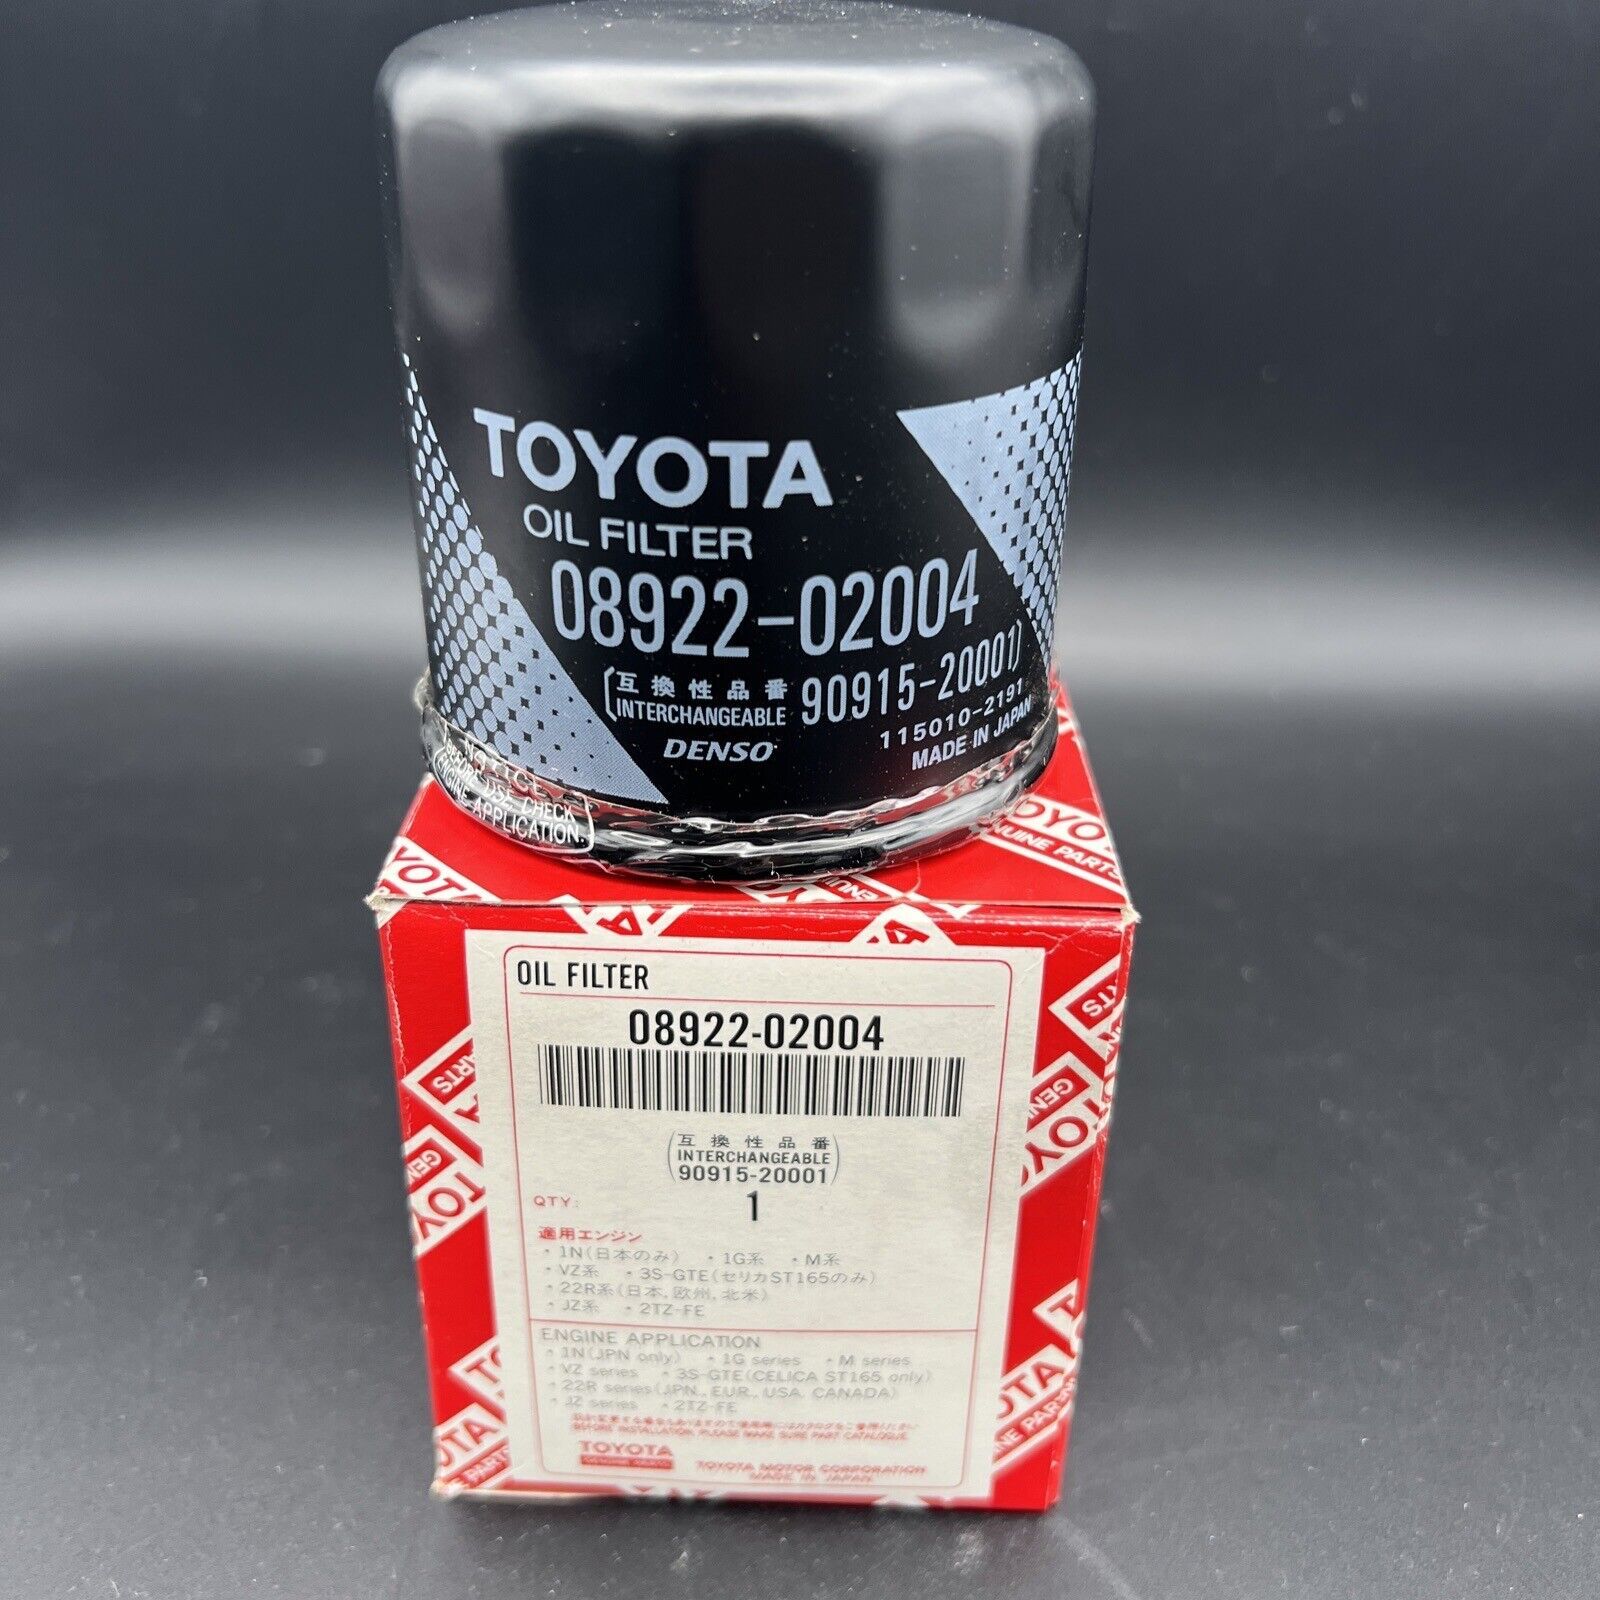 Primary image for Toyota Genuine Oil Filter 08922-02004 (New Open Box)